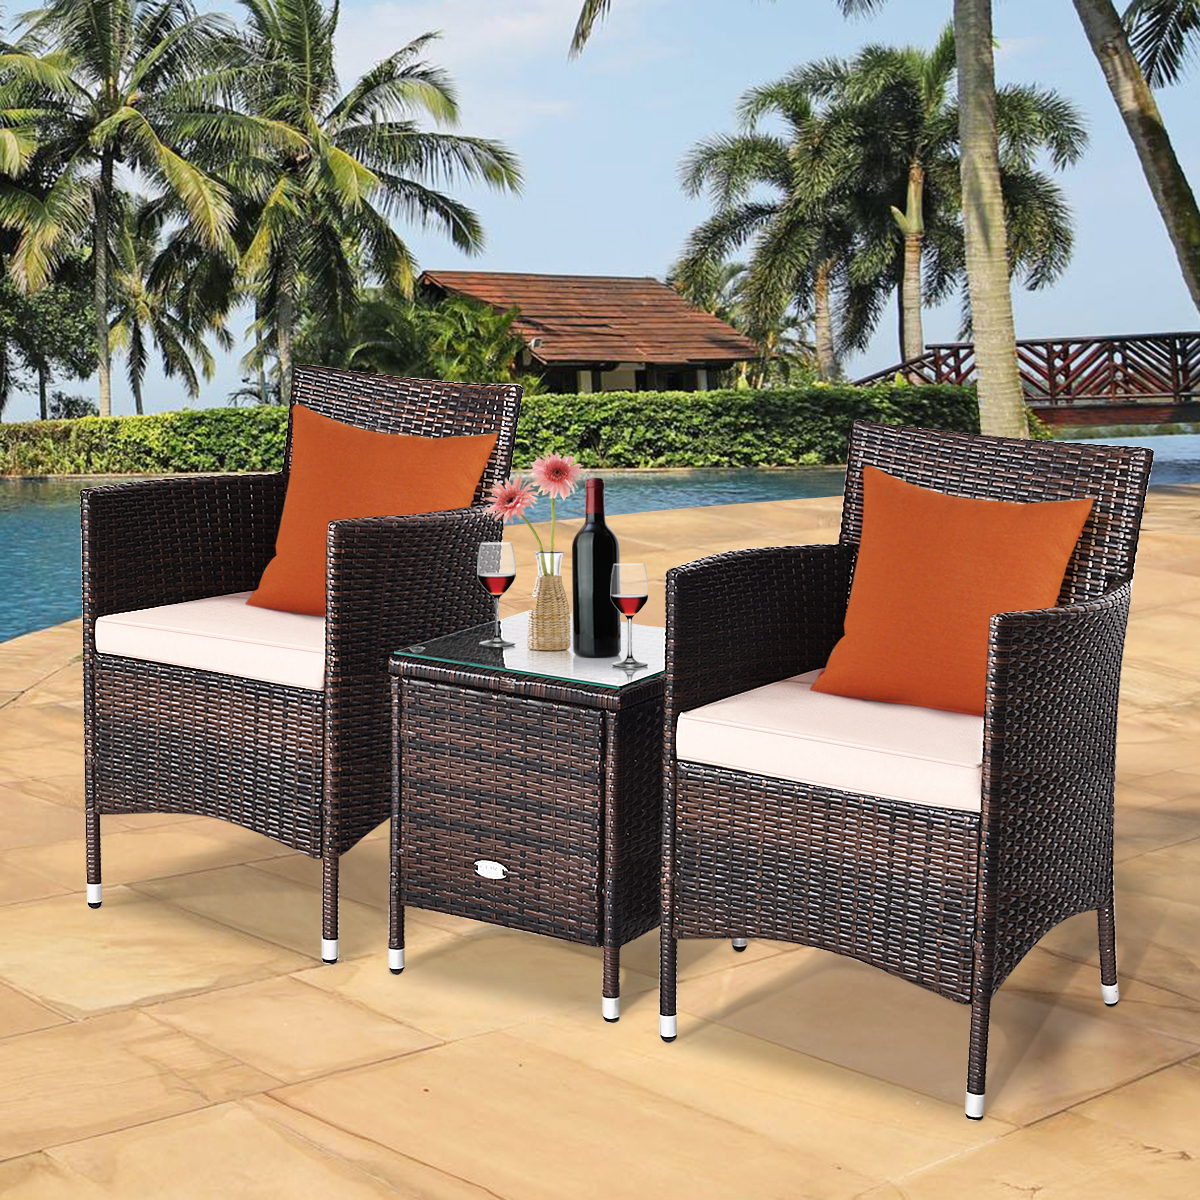 Gymax 3PCS Patio Rattan Chair & Table Furniture Set Outdoor w/ Beige Cushion - image 2 of 10